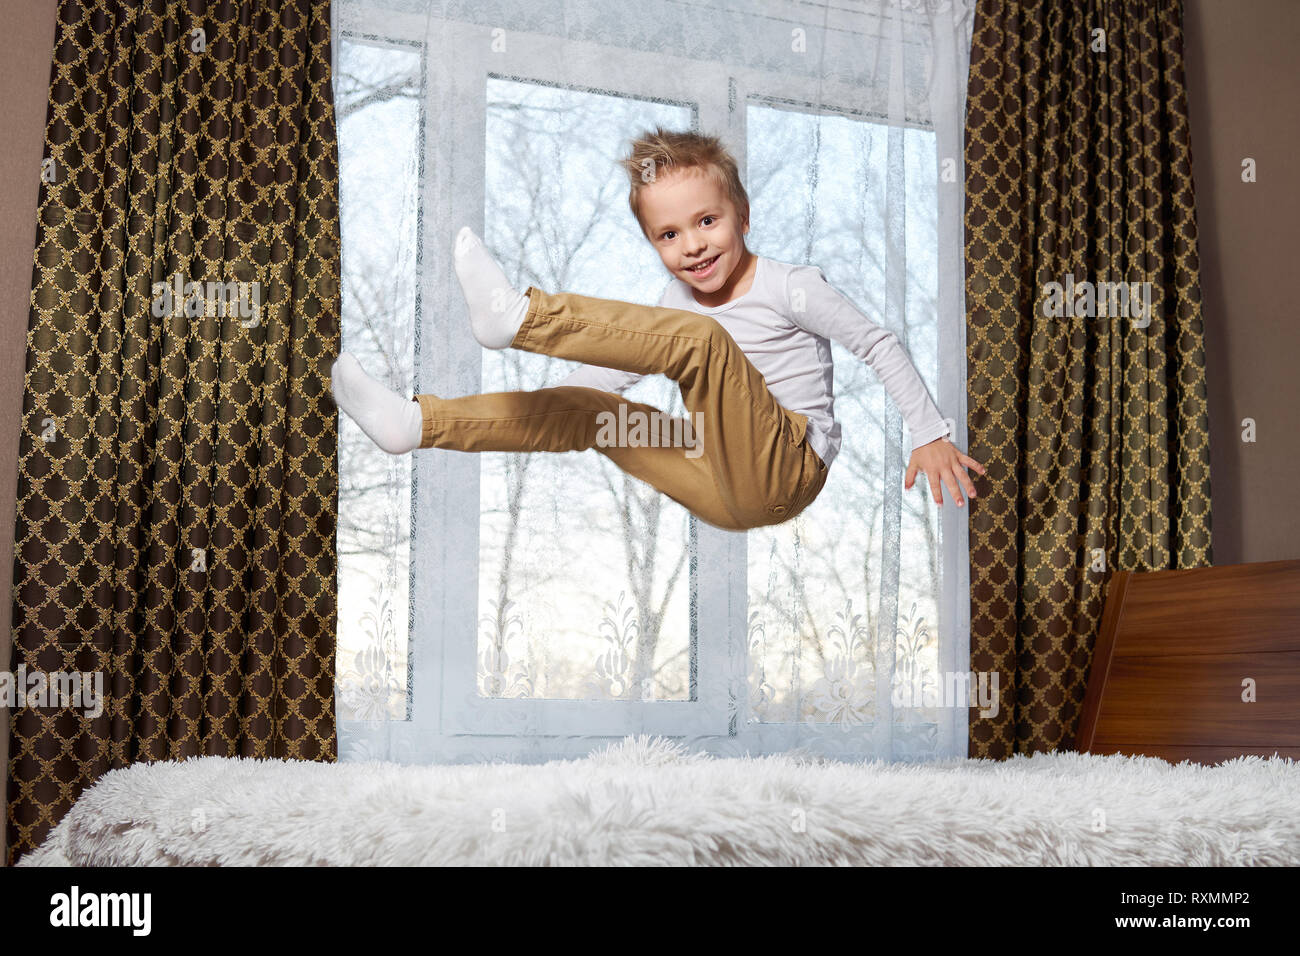 child fun home. Beautiful blond child 6 years old fooling around morning to room. Kid smiling jumping to bedroom on bed. Stock Photo